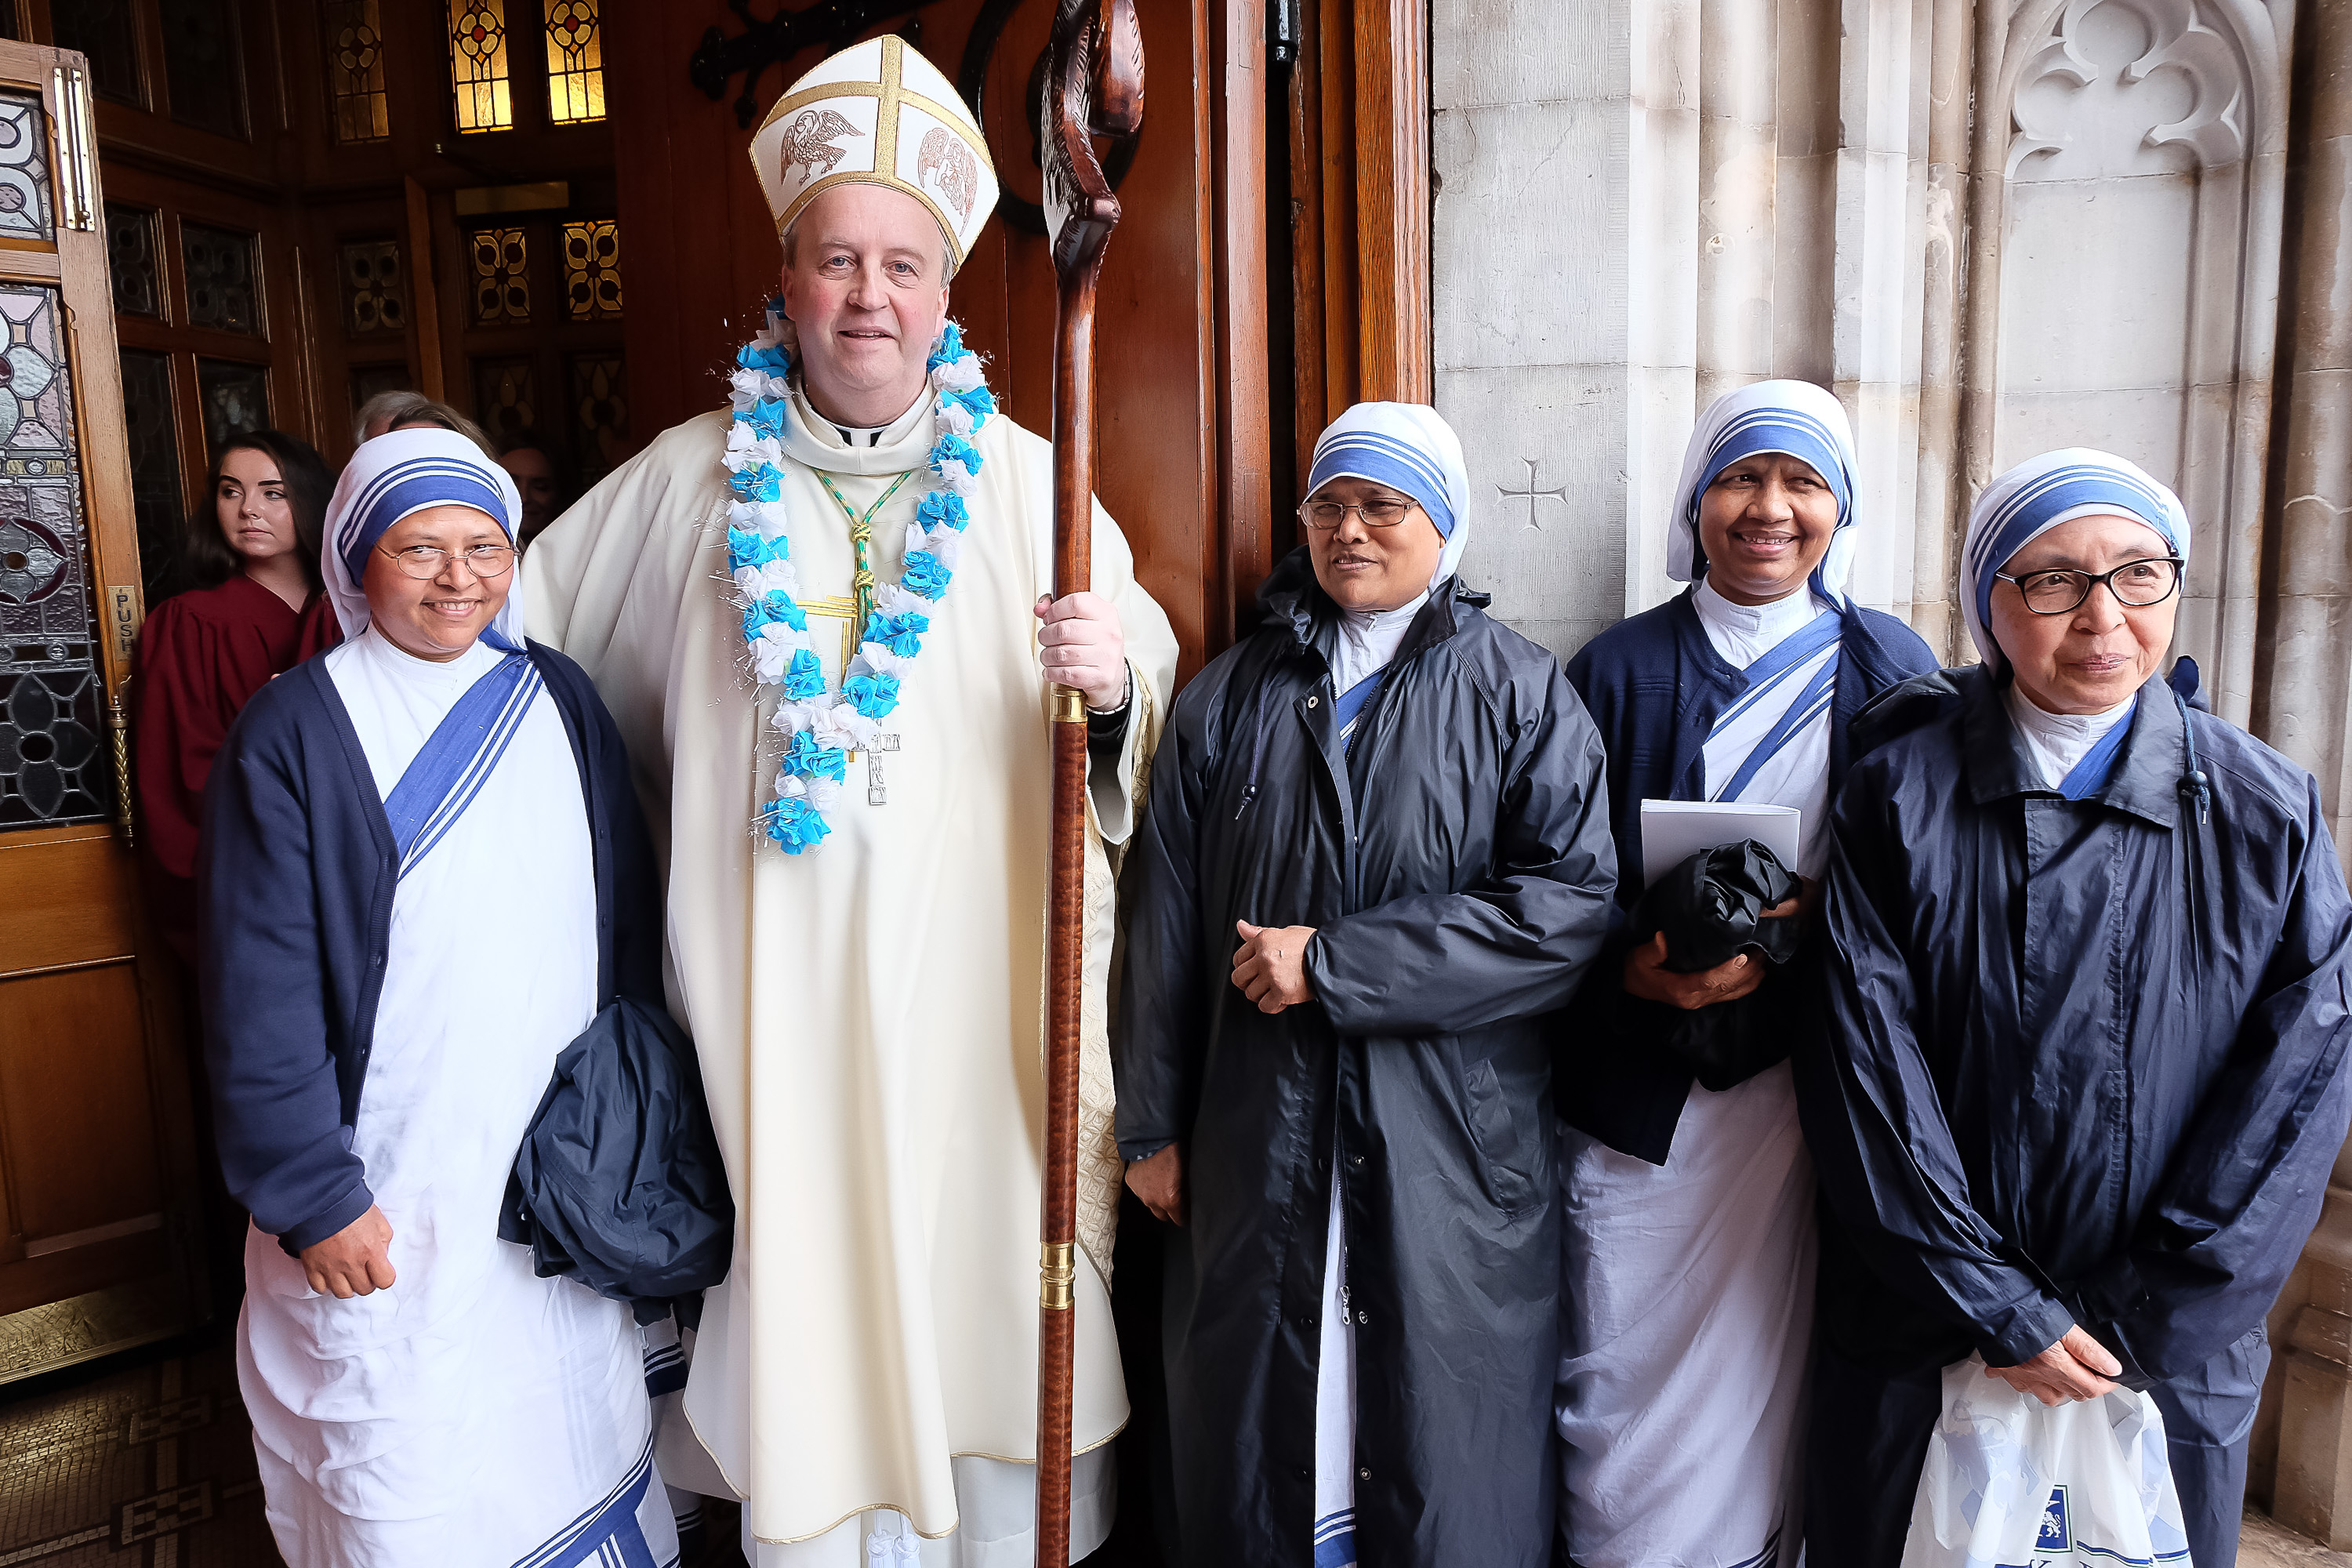 Bishop Michael Router is congratulated by the sisters of the Missionaries of Charity  Ordination of Bishop Michael RouterSt Patrick's Cathedral, Armagh,  21 July 2019Credit: LiamMcArdle.comOrdination of Bishop Michael RouterSt Patrick's Cathedral, Armagh,  21 July 2019Credit: LiamMcArdle.com